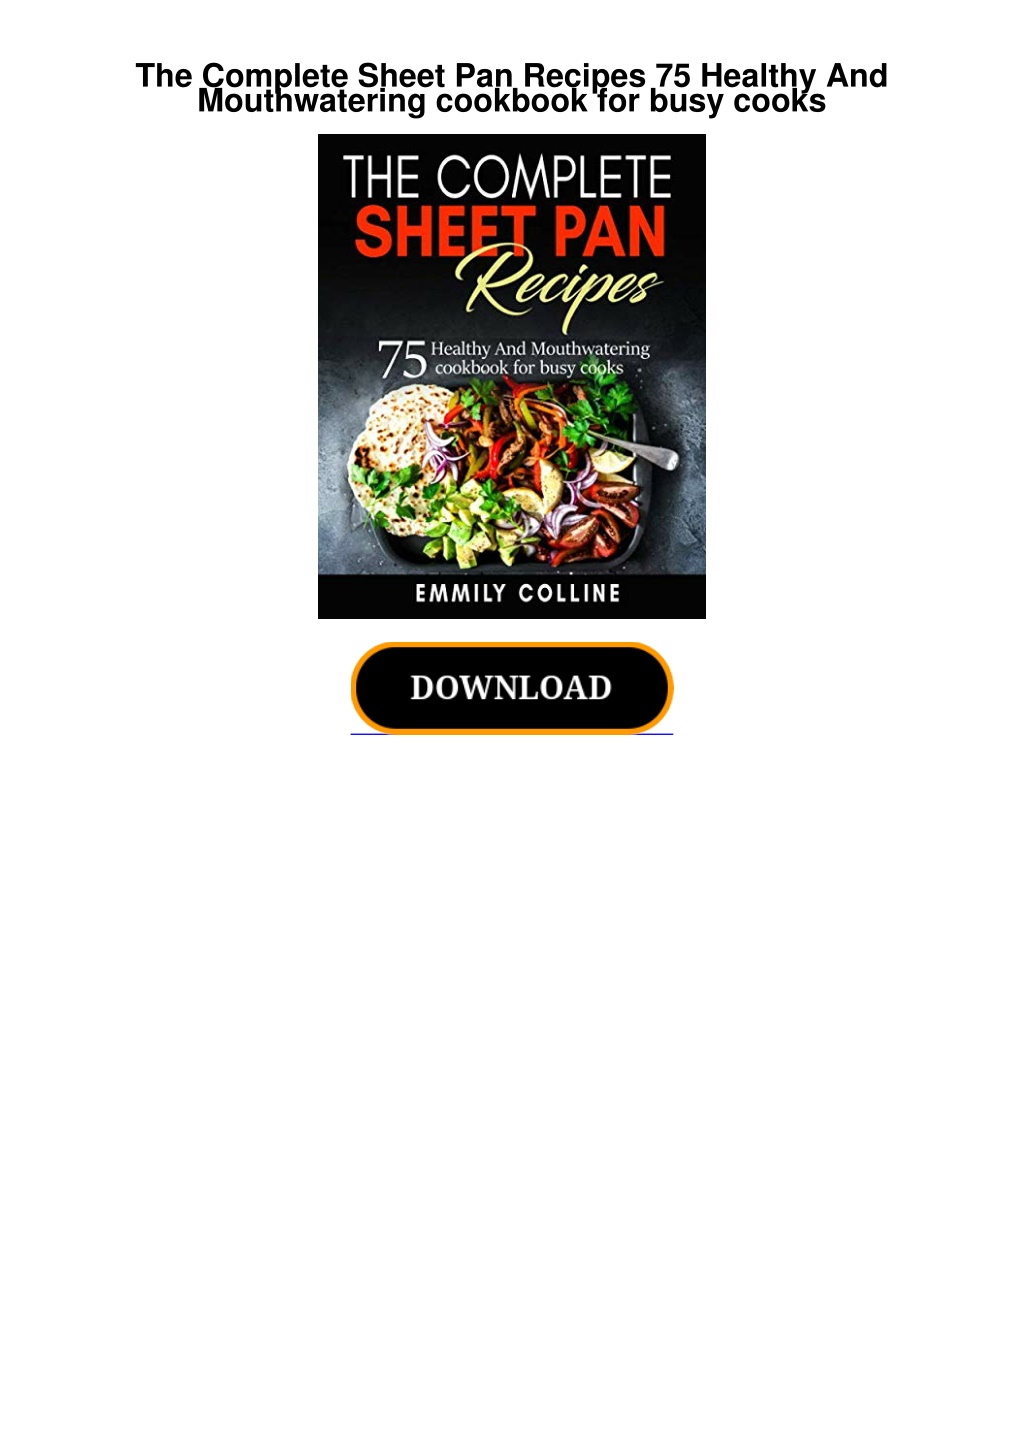 the complete sheet pan recipes 75 healthy l.w